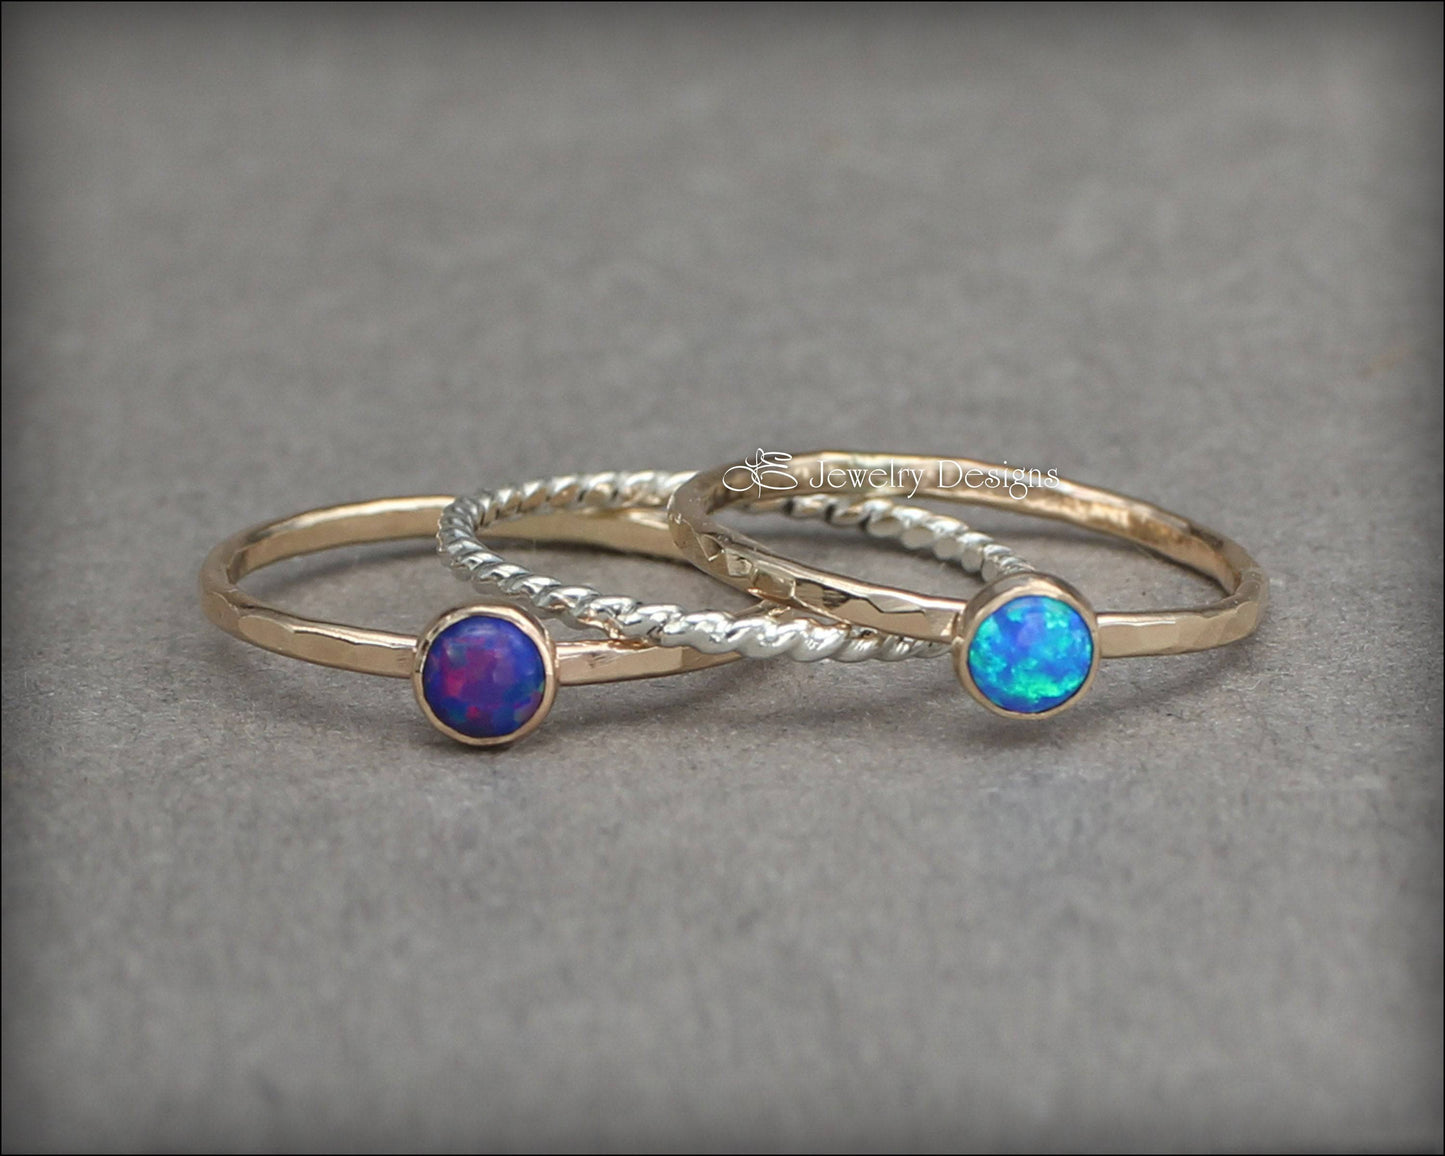 Opal Ring Set - (with 2 opals) - LE Jewelry Designs